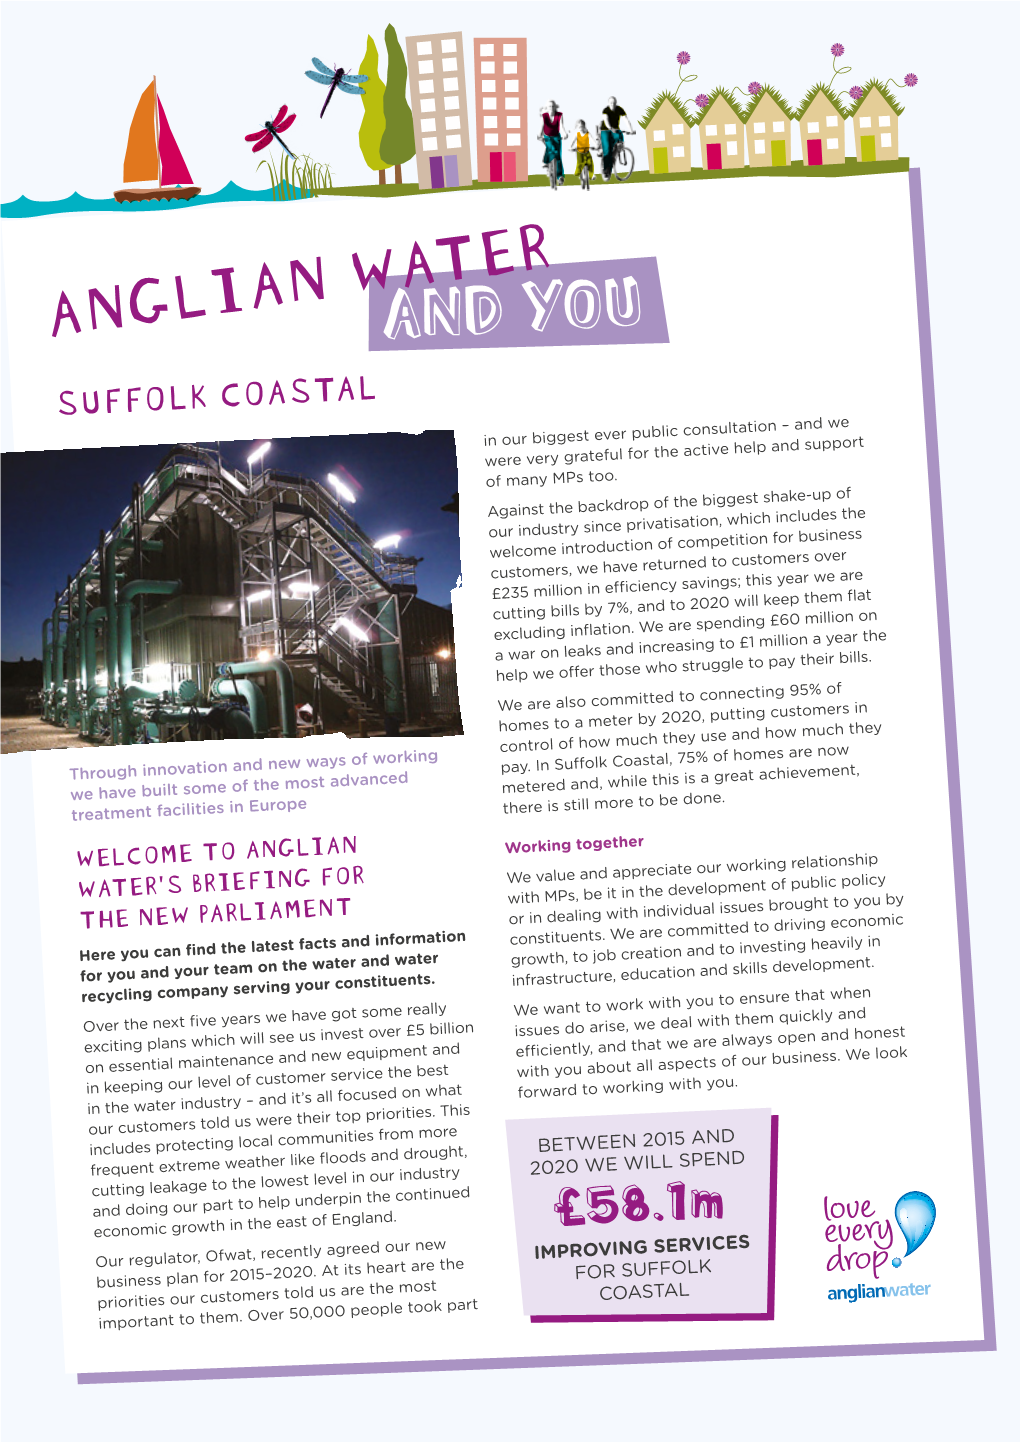 ANGLIAN WATERAND YOU SUFFOLK COASTAL in Our Biggest Ever Public Consultation – and We Were Very Grateful for the Active Help and Support of Many Mps Too